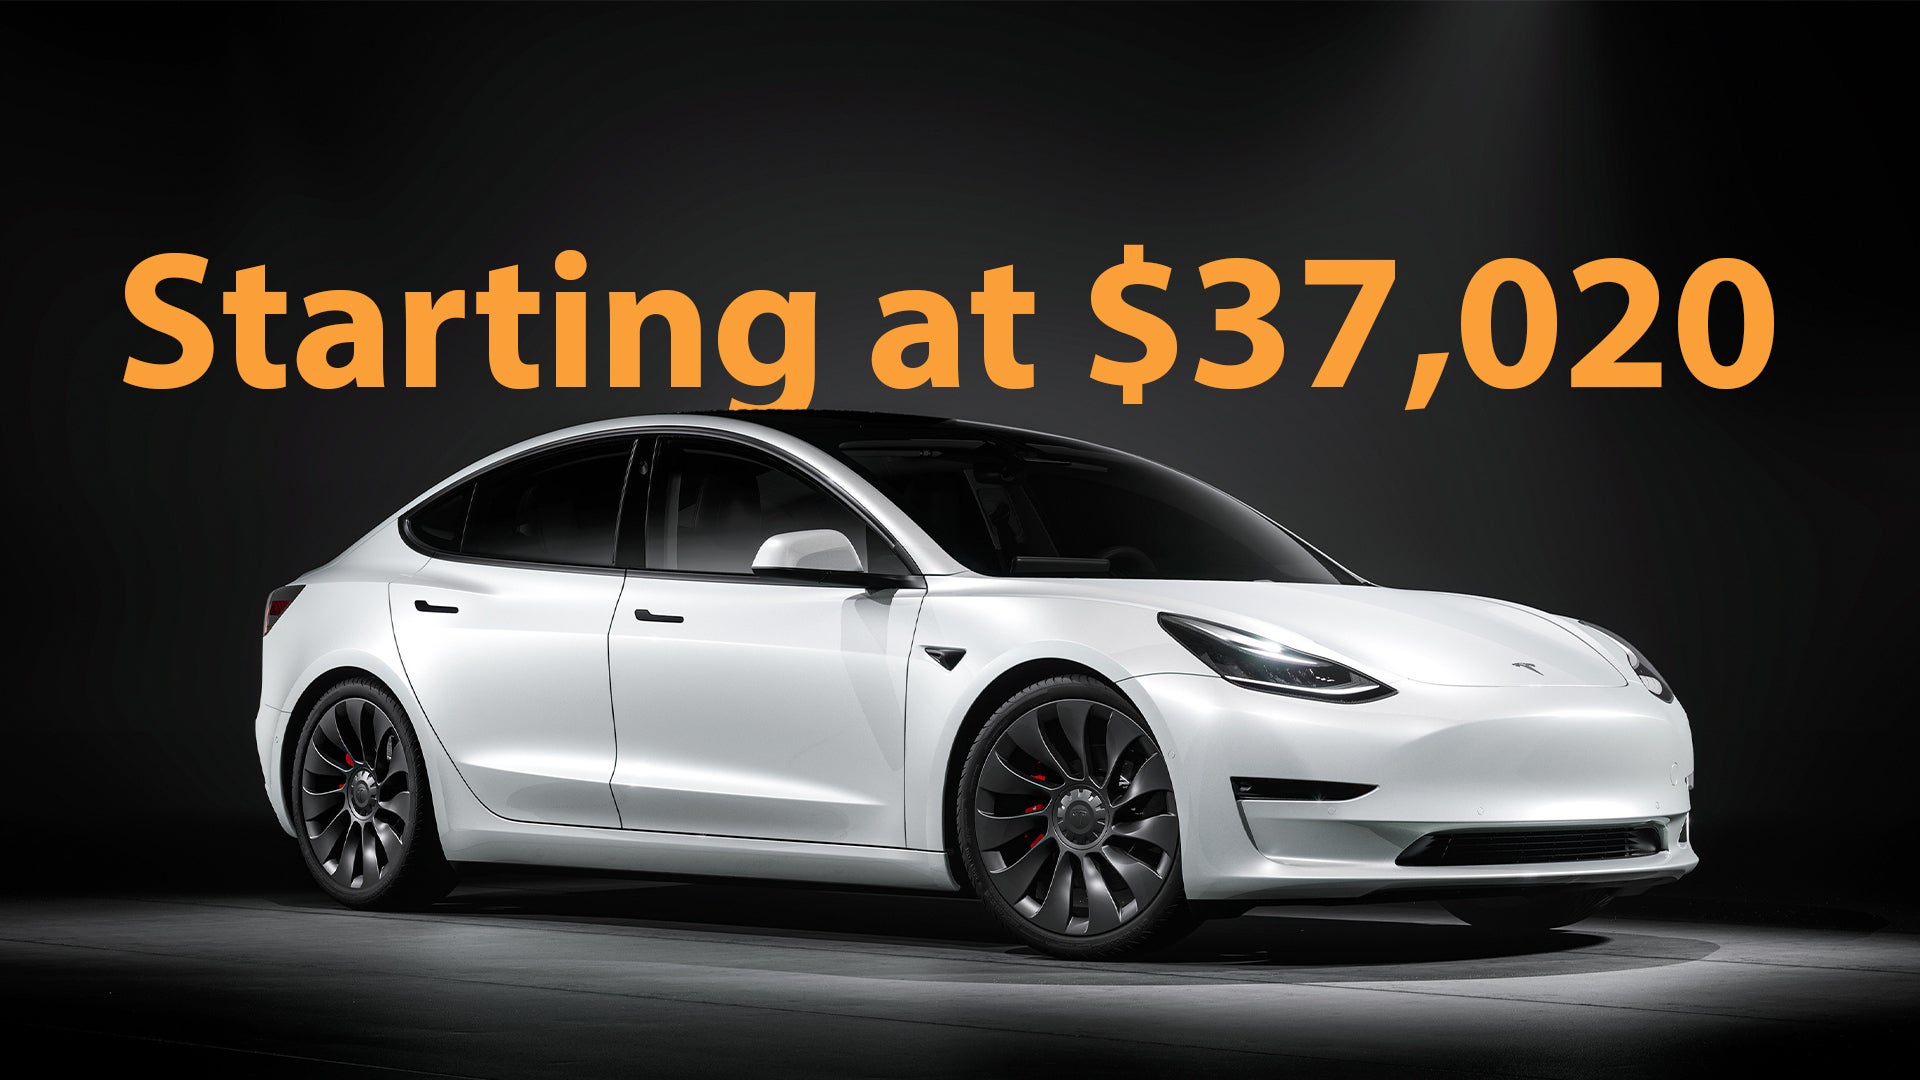 Tesla Model 3 Price Slashed to $37,020 in Latest Round of Discounts